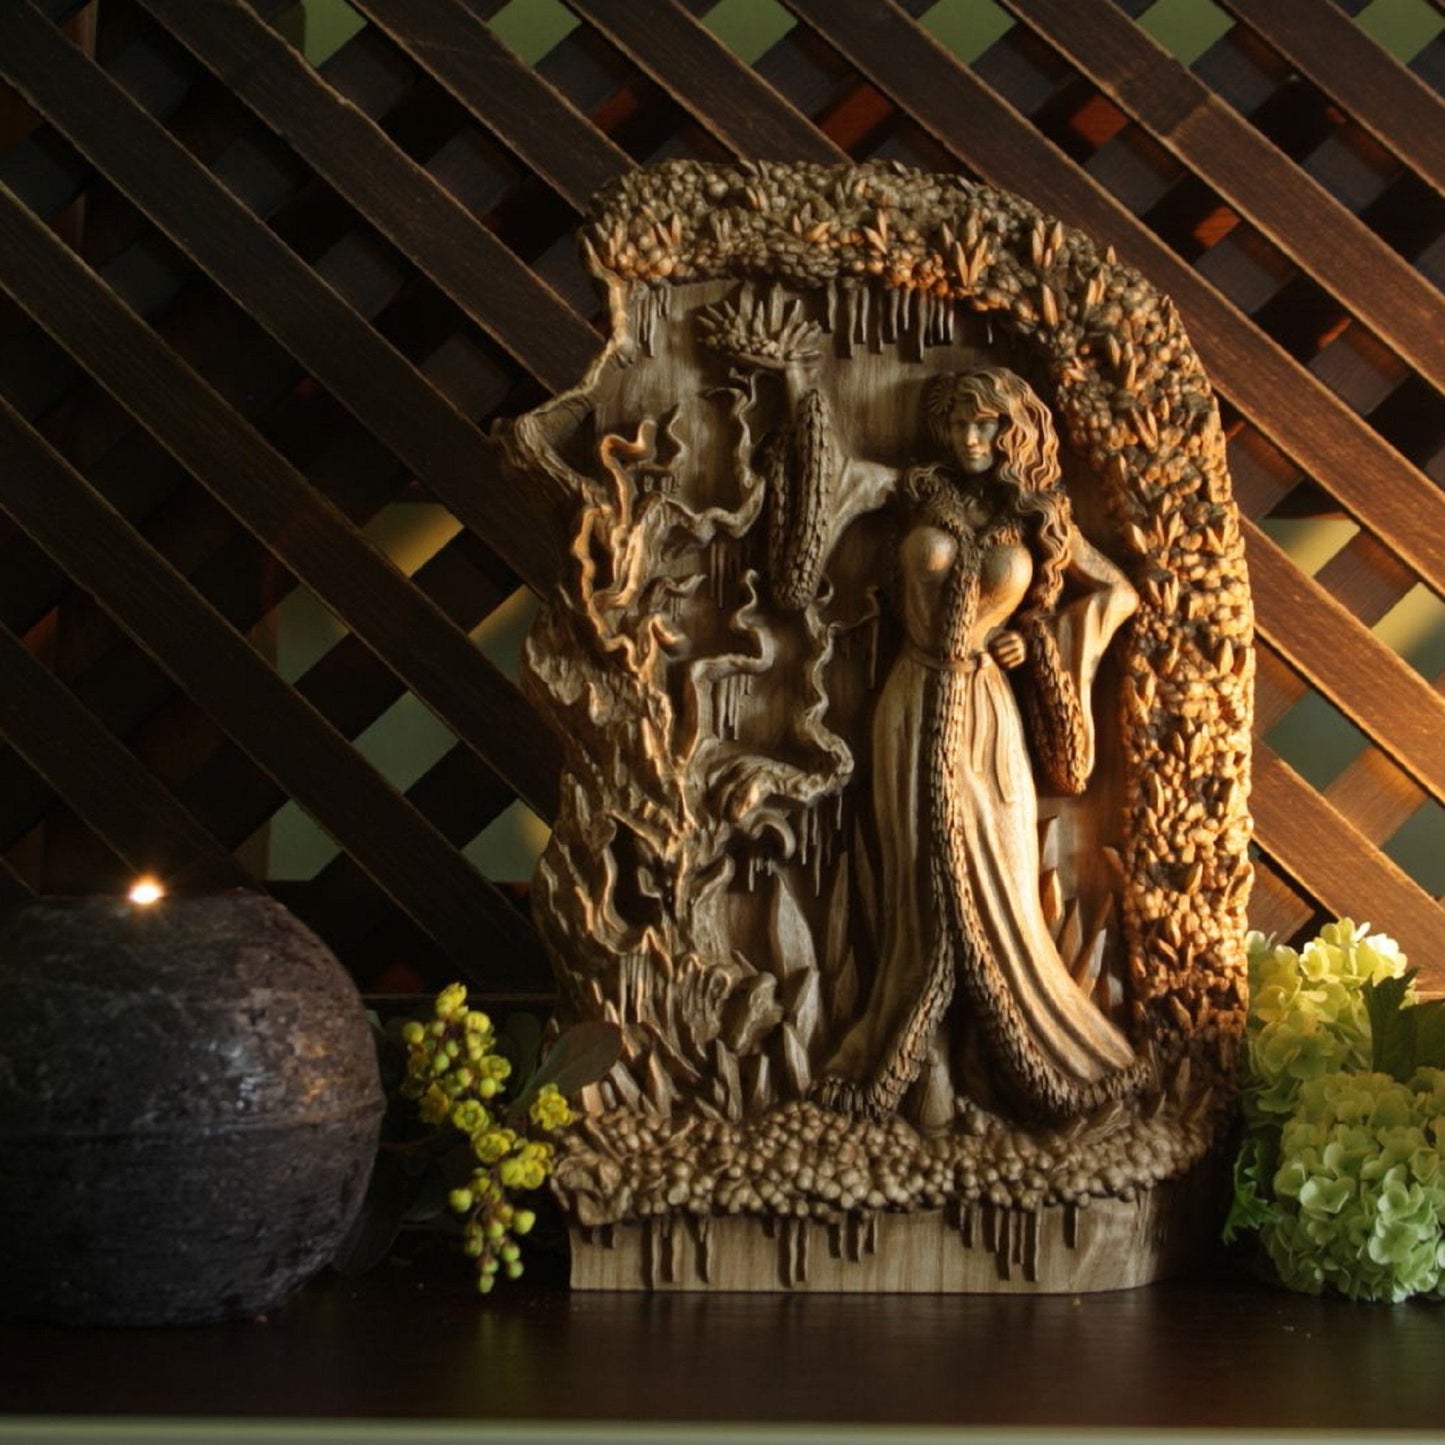 Maiden mother crone, Wood carving, wooden statue